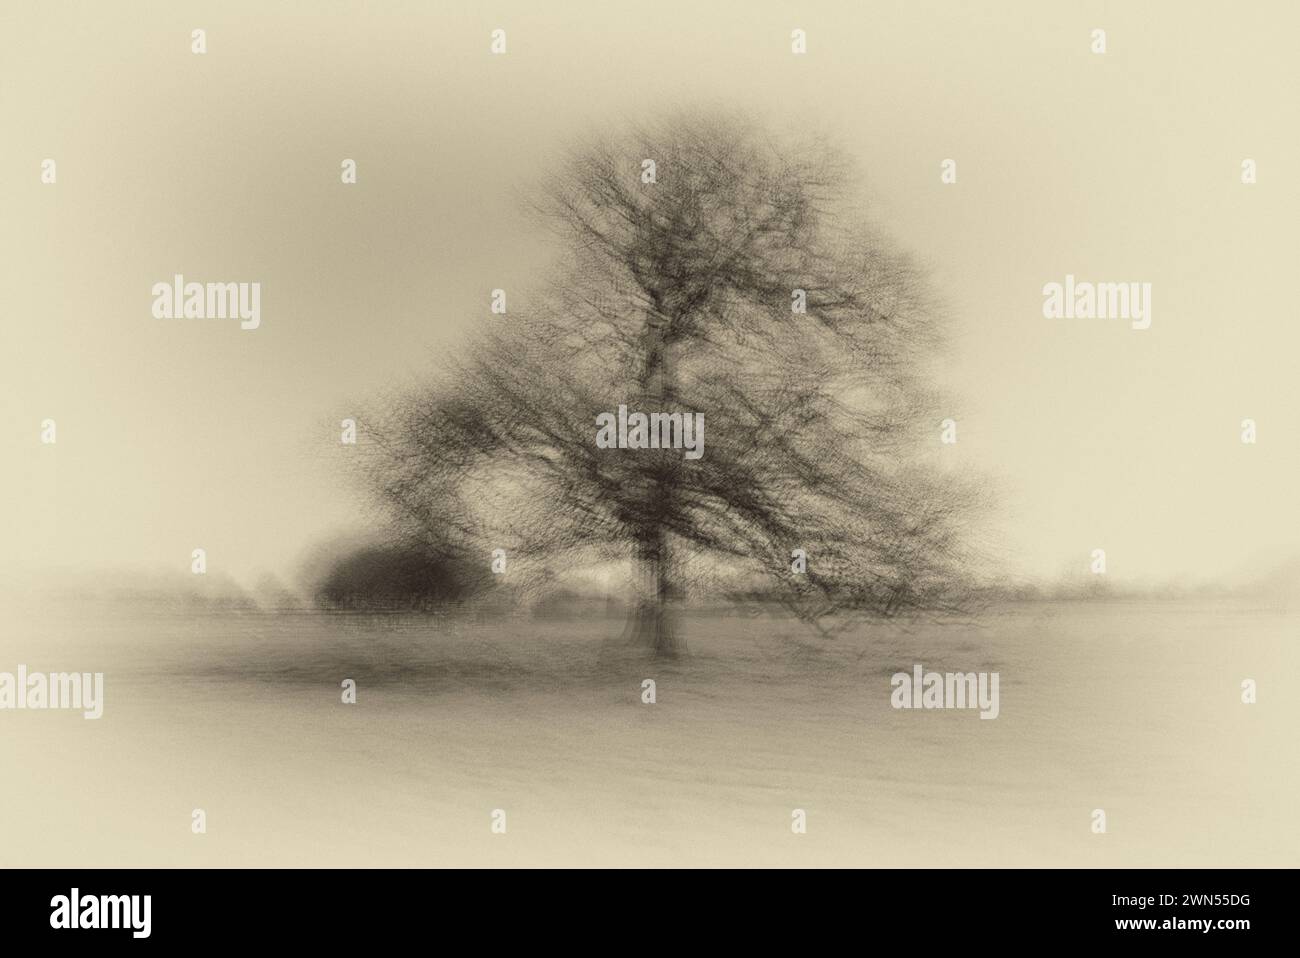 A tree with Intentional camera movement and multiple exposures Stock Photo